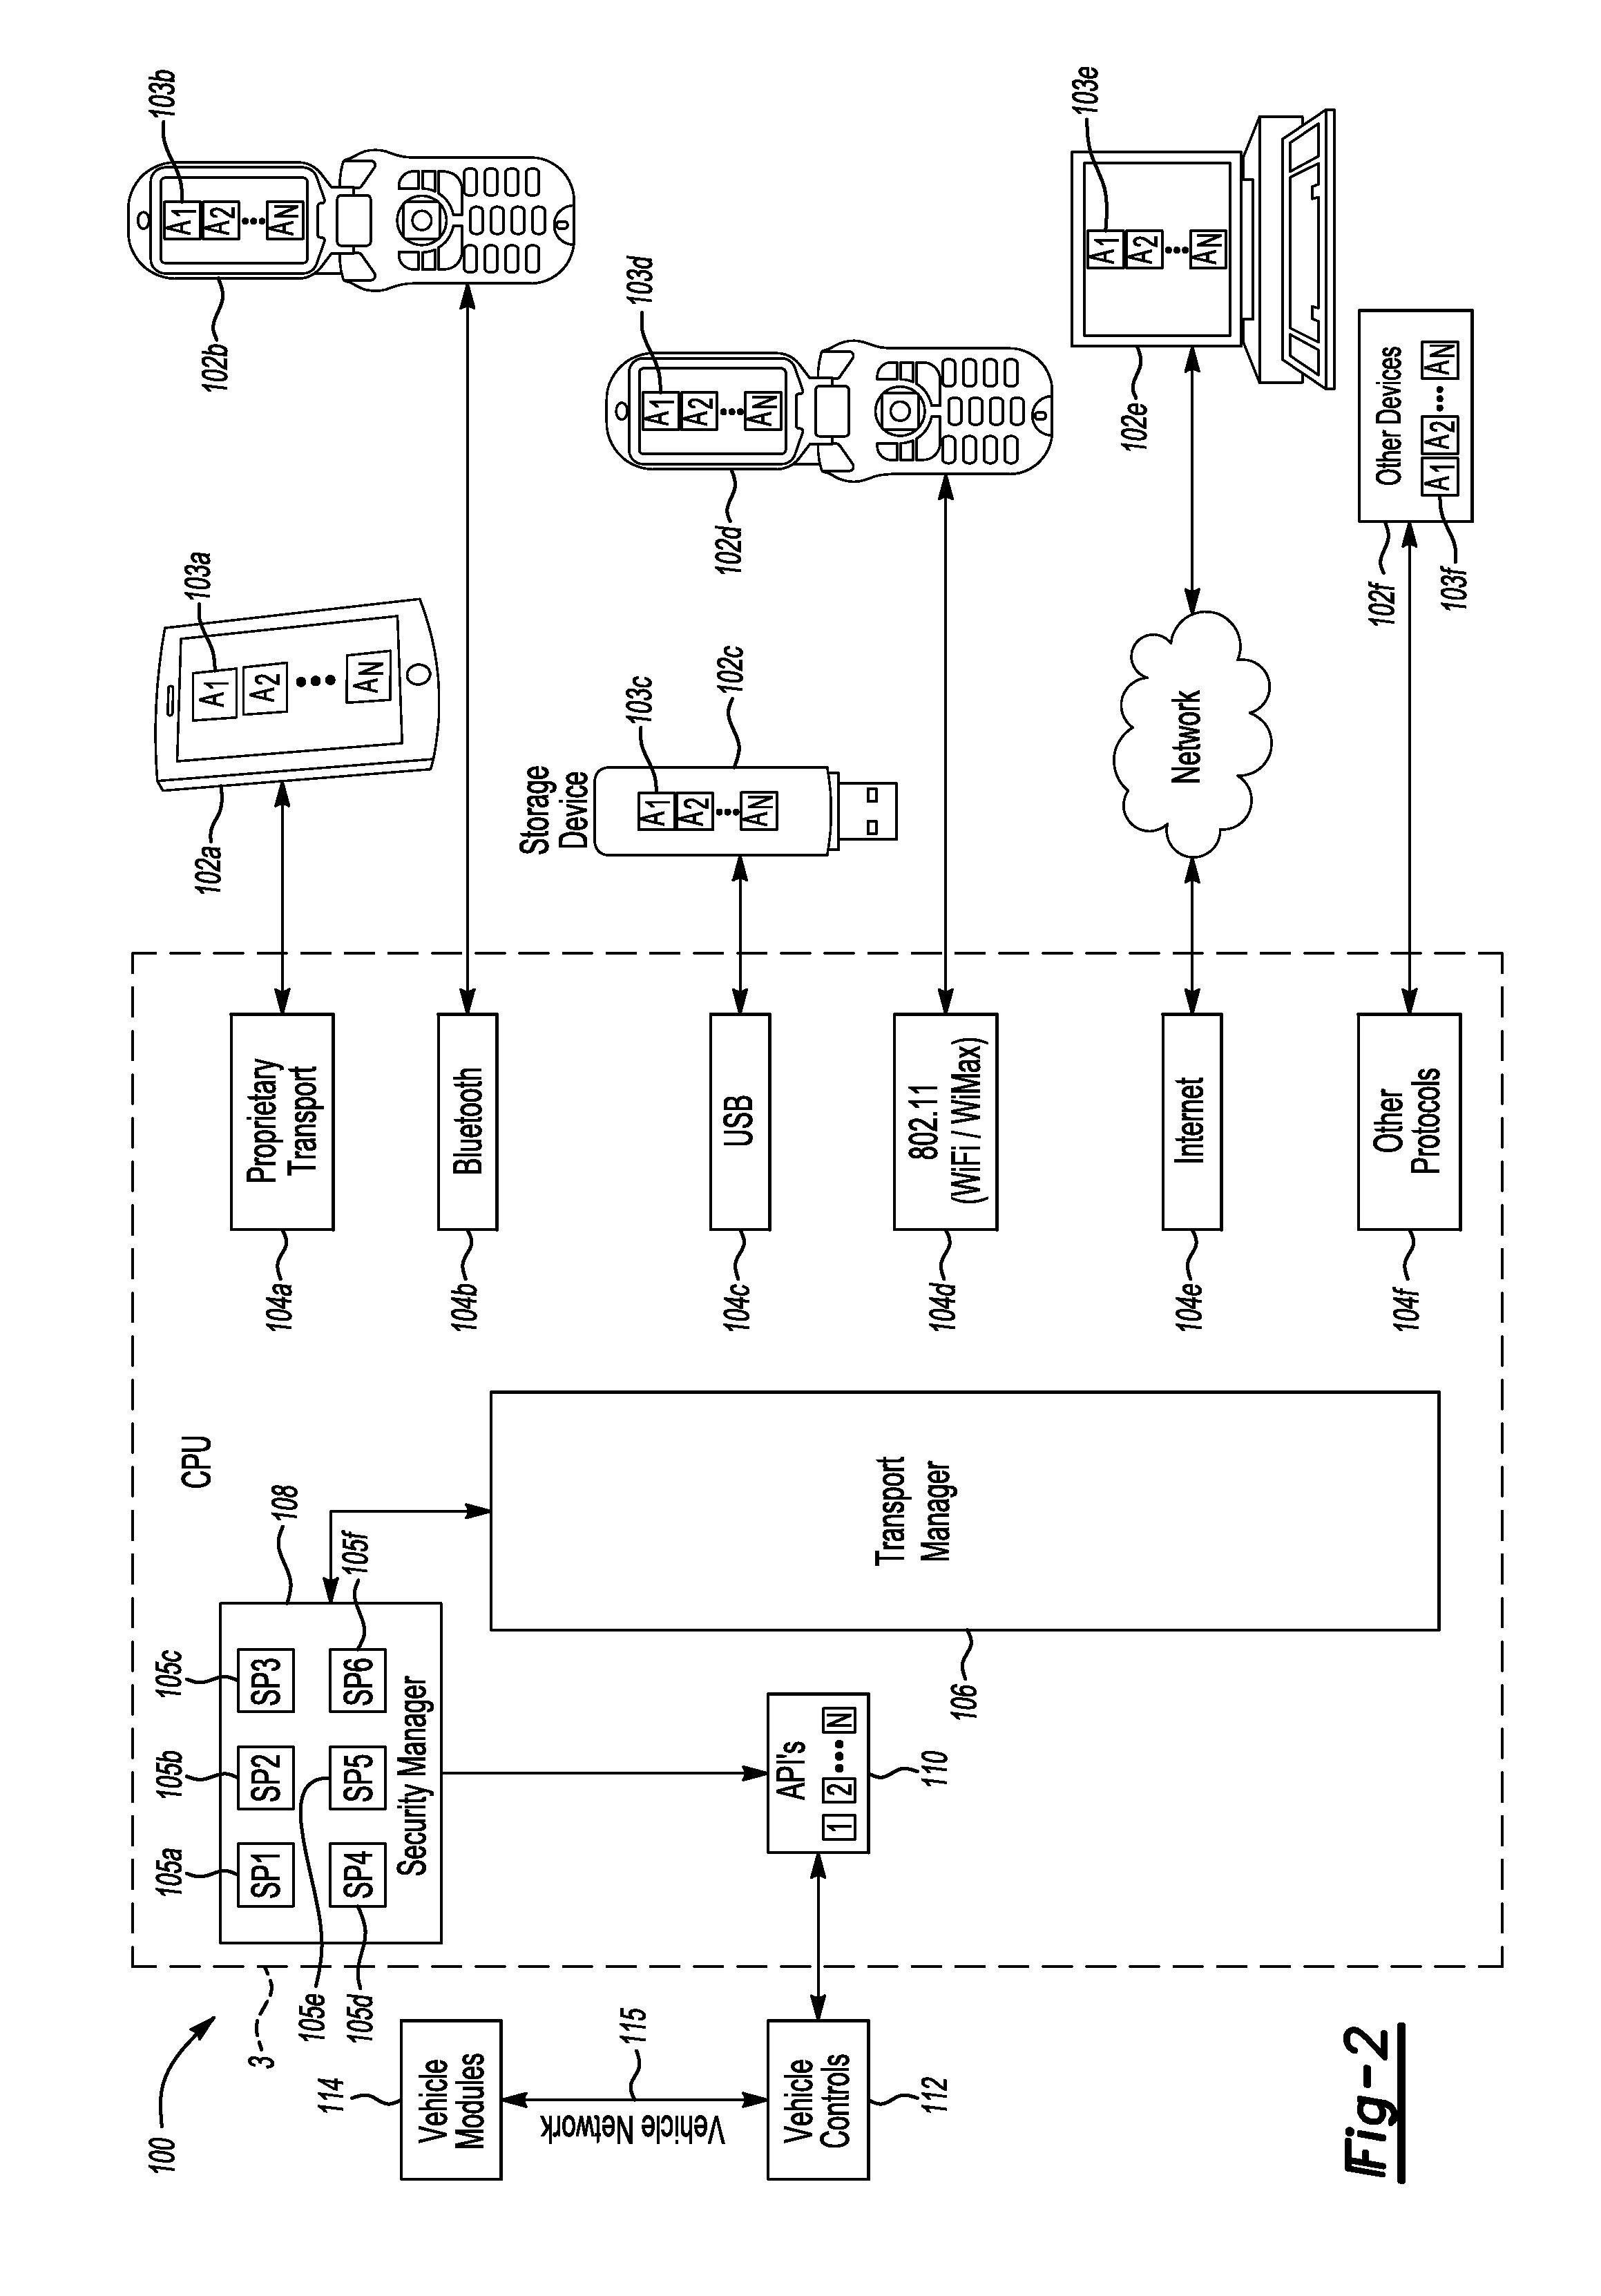 Methods and systems for implementing and enforcing security and resource policies for a vehicle